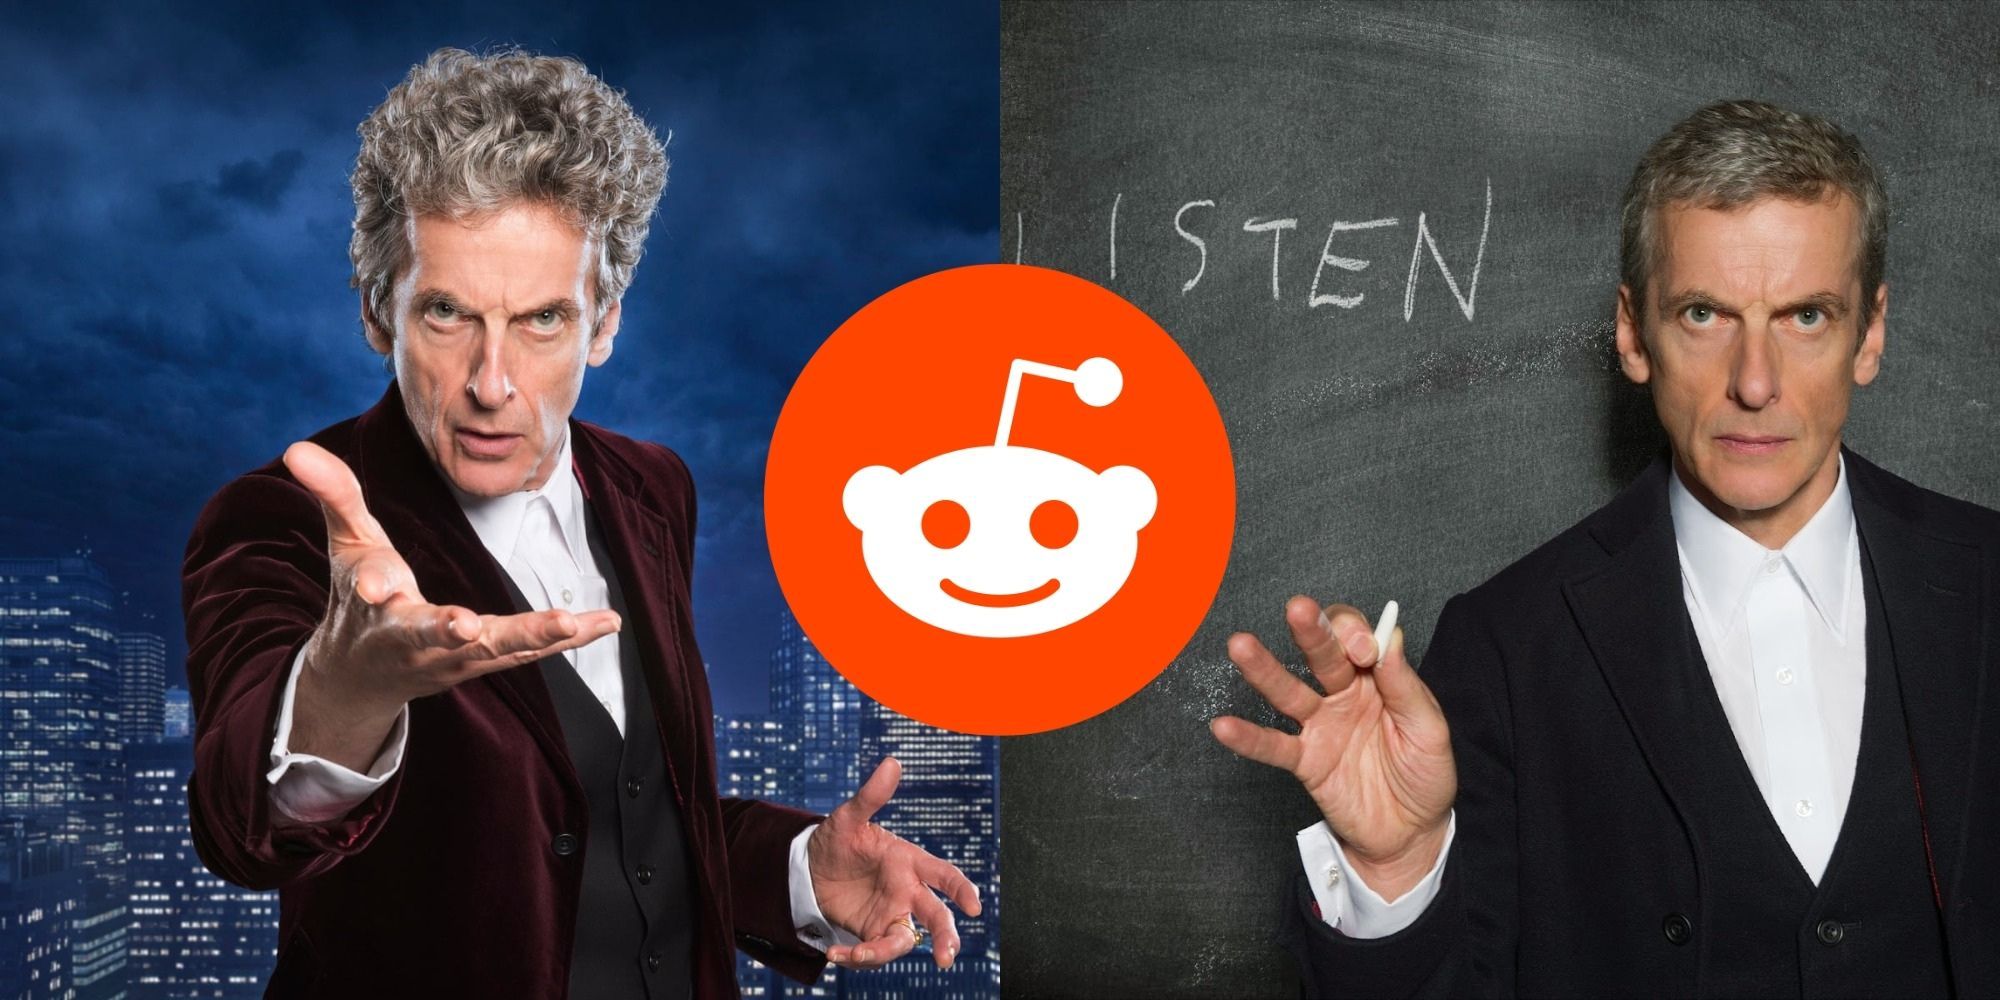 Split image showing the Twelfth Doctor with his hand reaching out and in front of a blackboard, and the Reddit logo